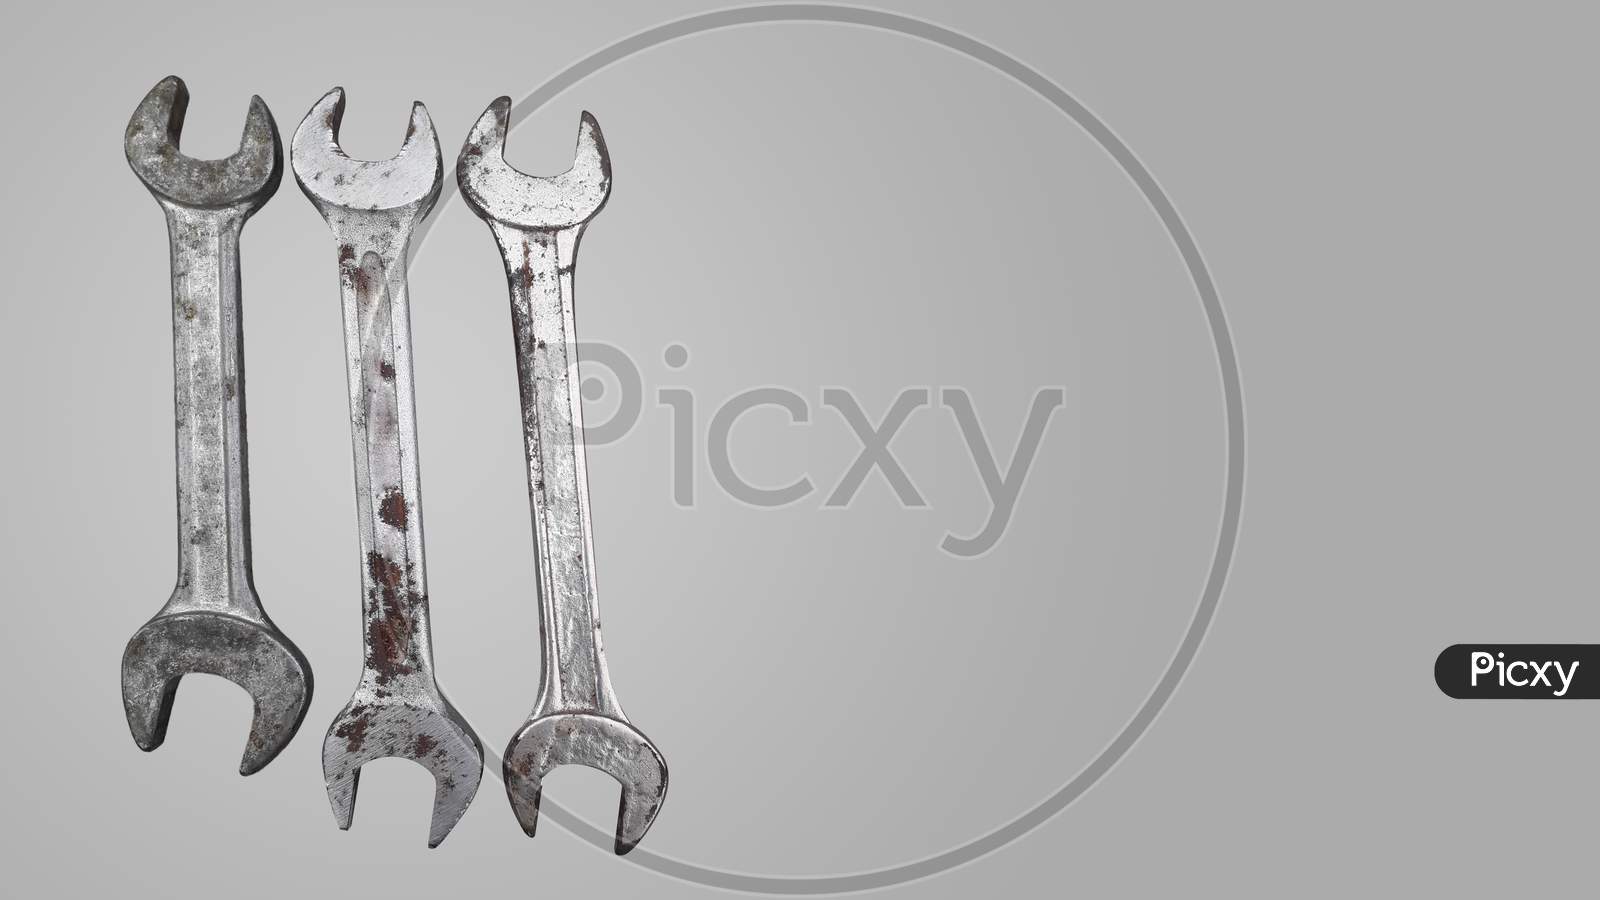 Old rusty iron or steel wrenches used to open nut or bolt in automobile repairing and for other industrial purposes -isolated image